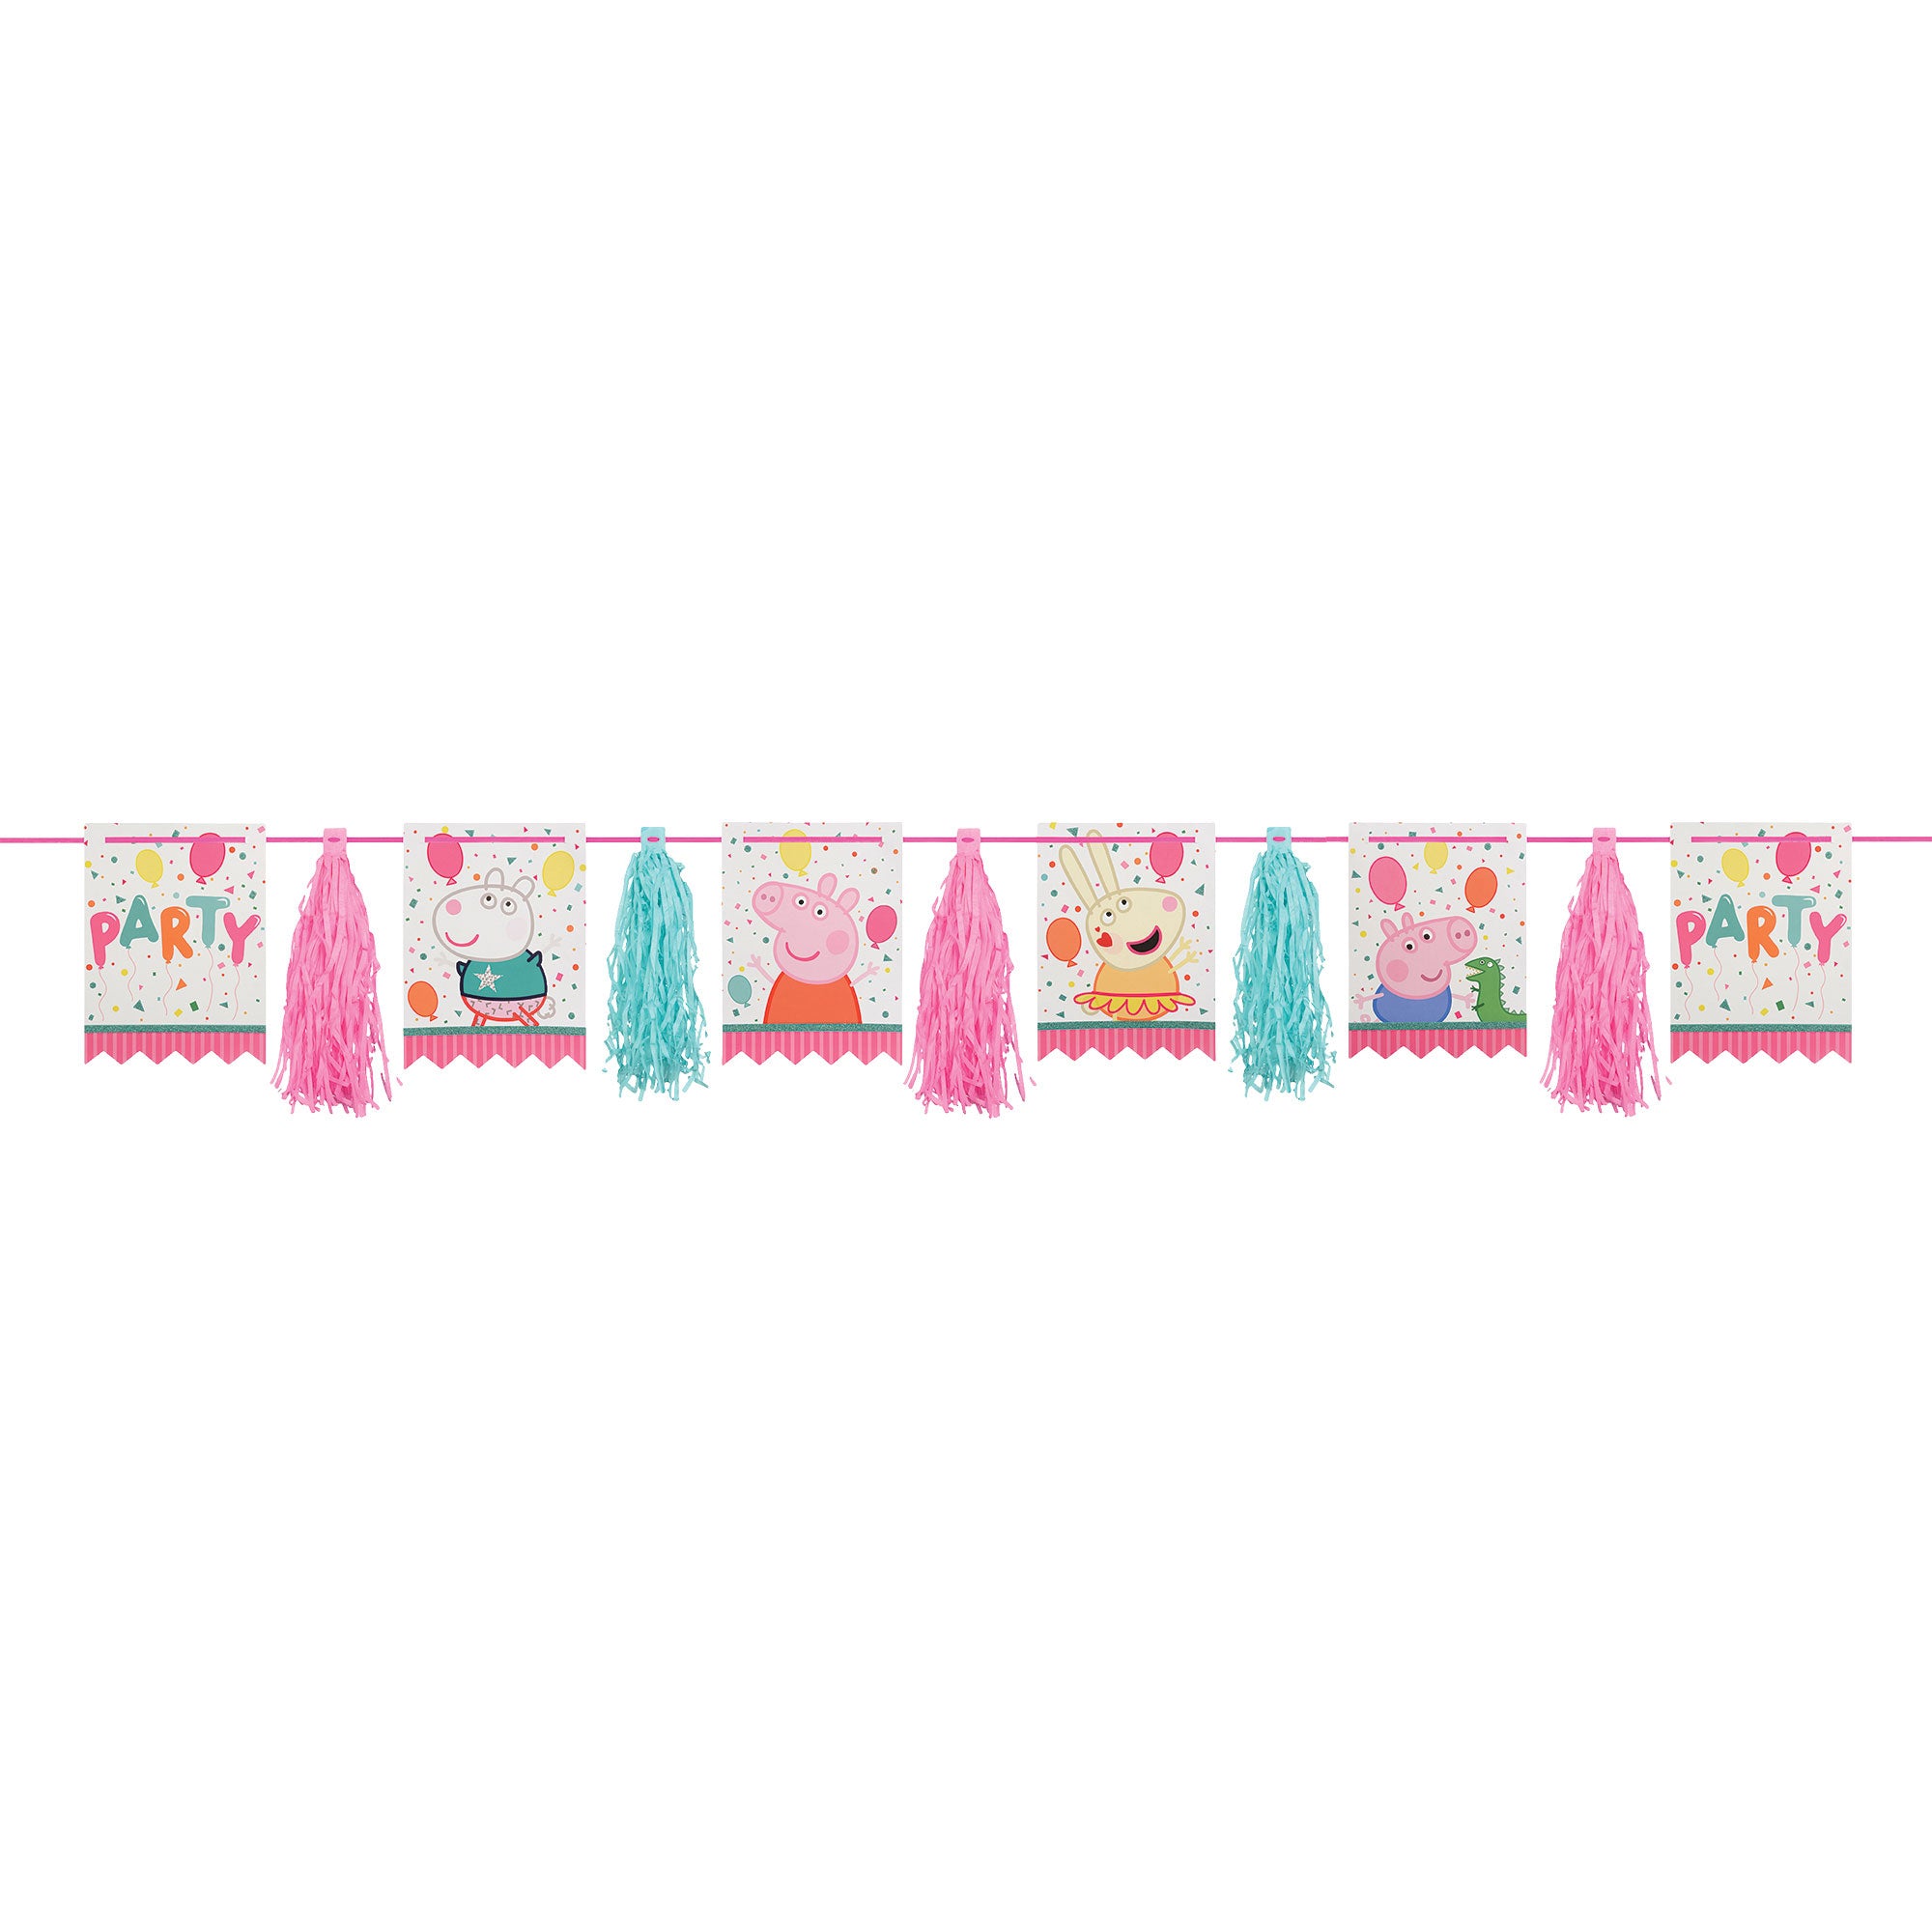 Peppa Pig Confetti Party Pennants and Tassel Garland Glittered - 28cm x 3m Default Title